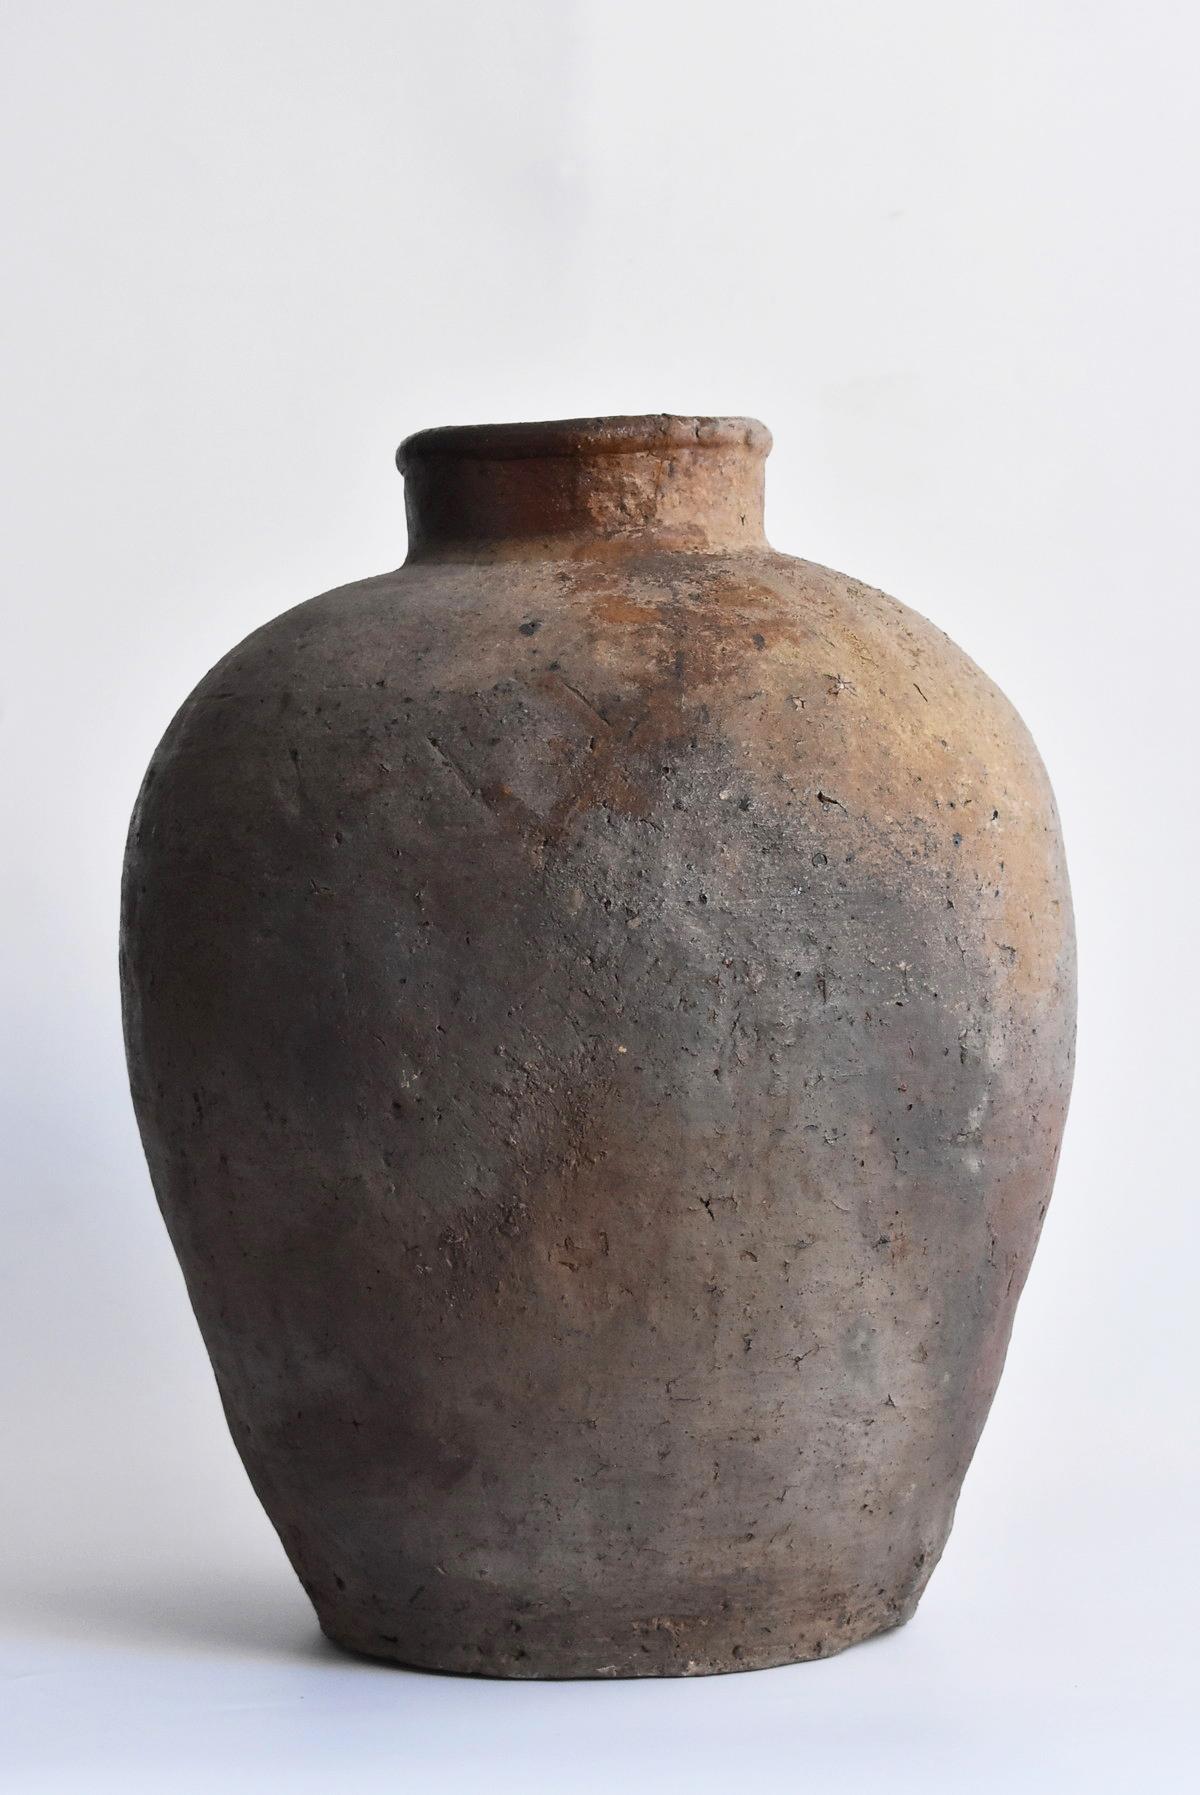 18th Century and Earlier Old Japanese Vase 1400-1500 Mid-Muromachi Period Bizen Jar / Tsubo